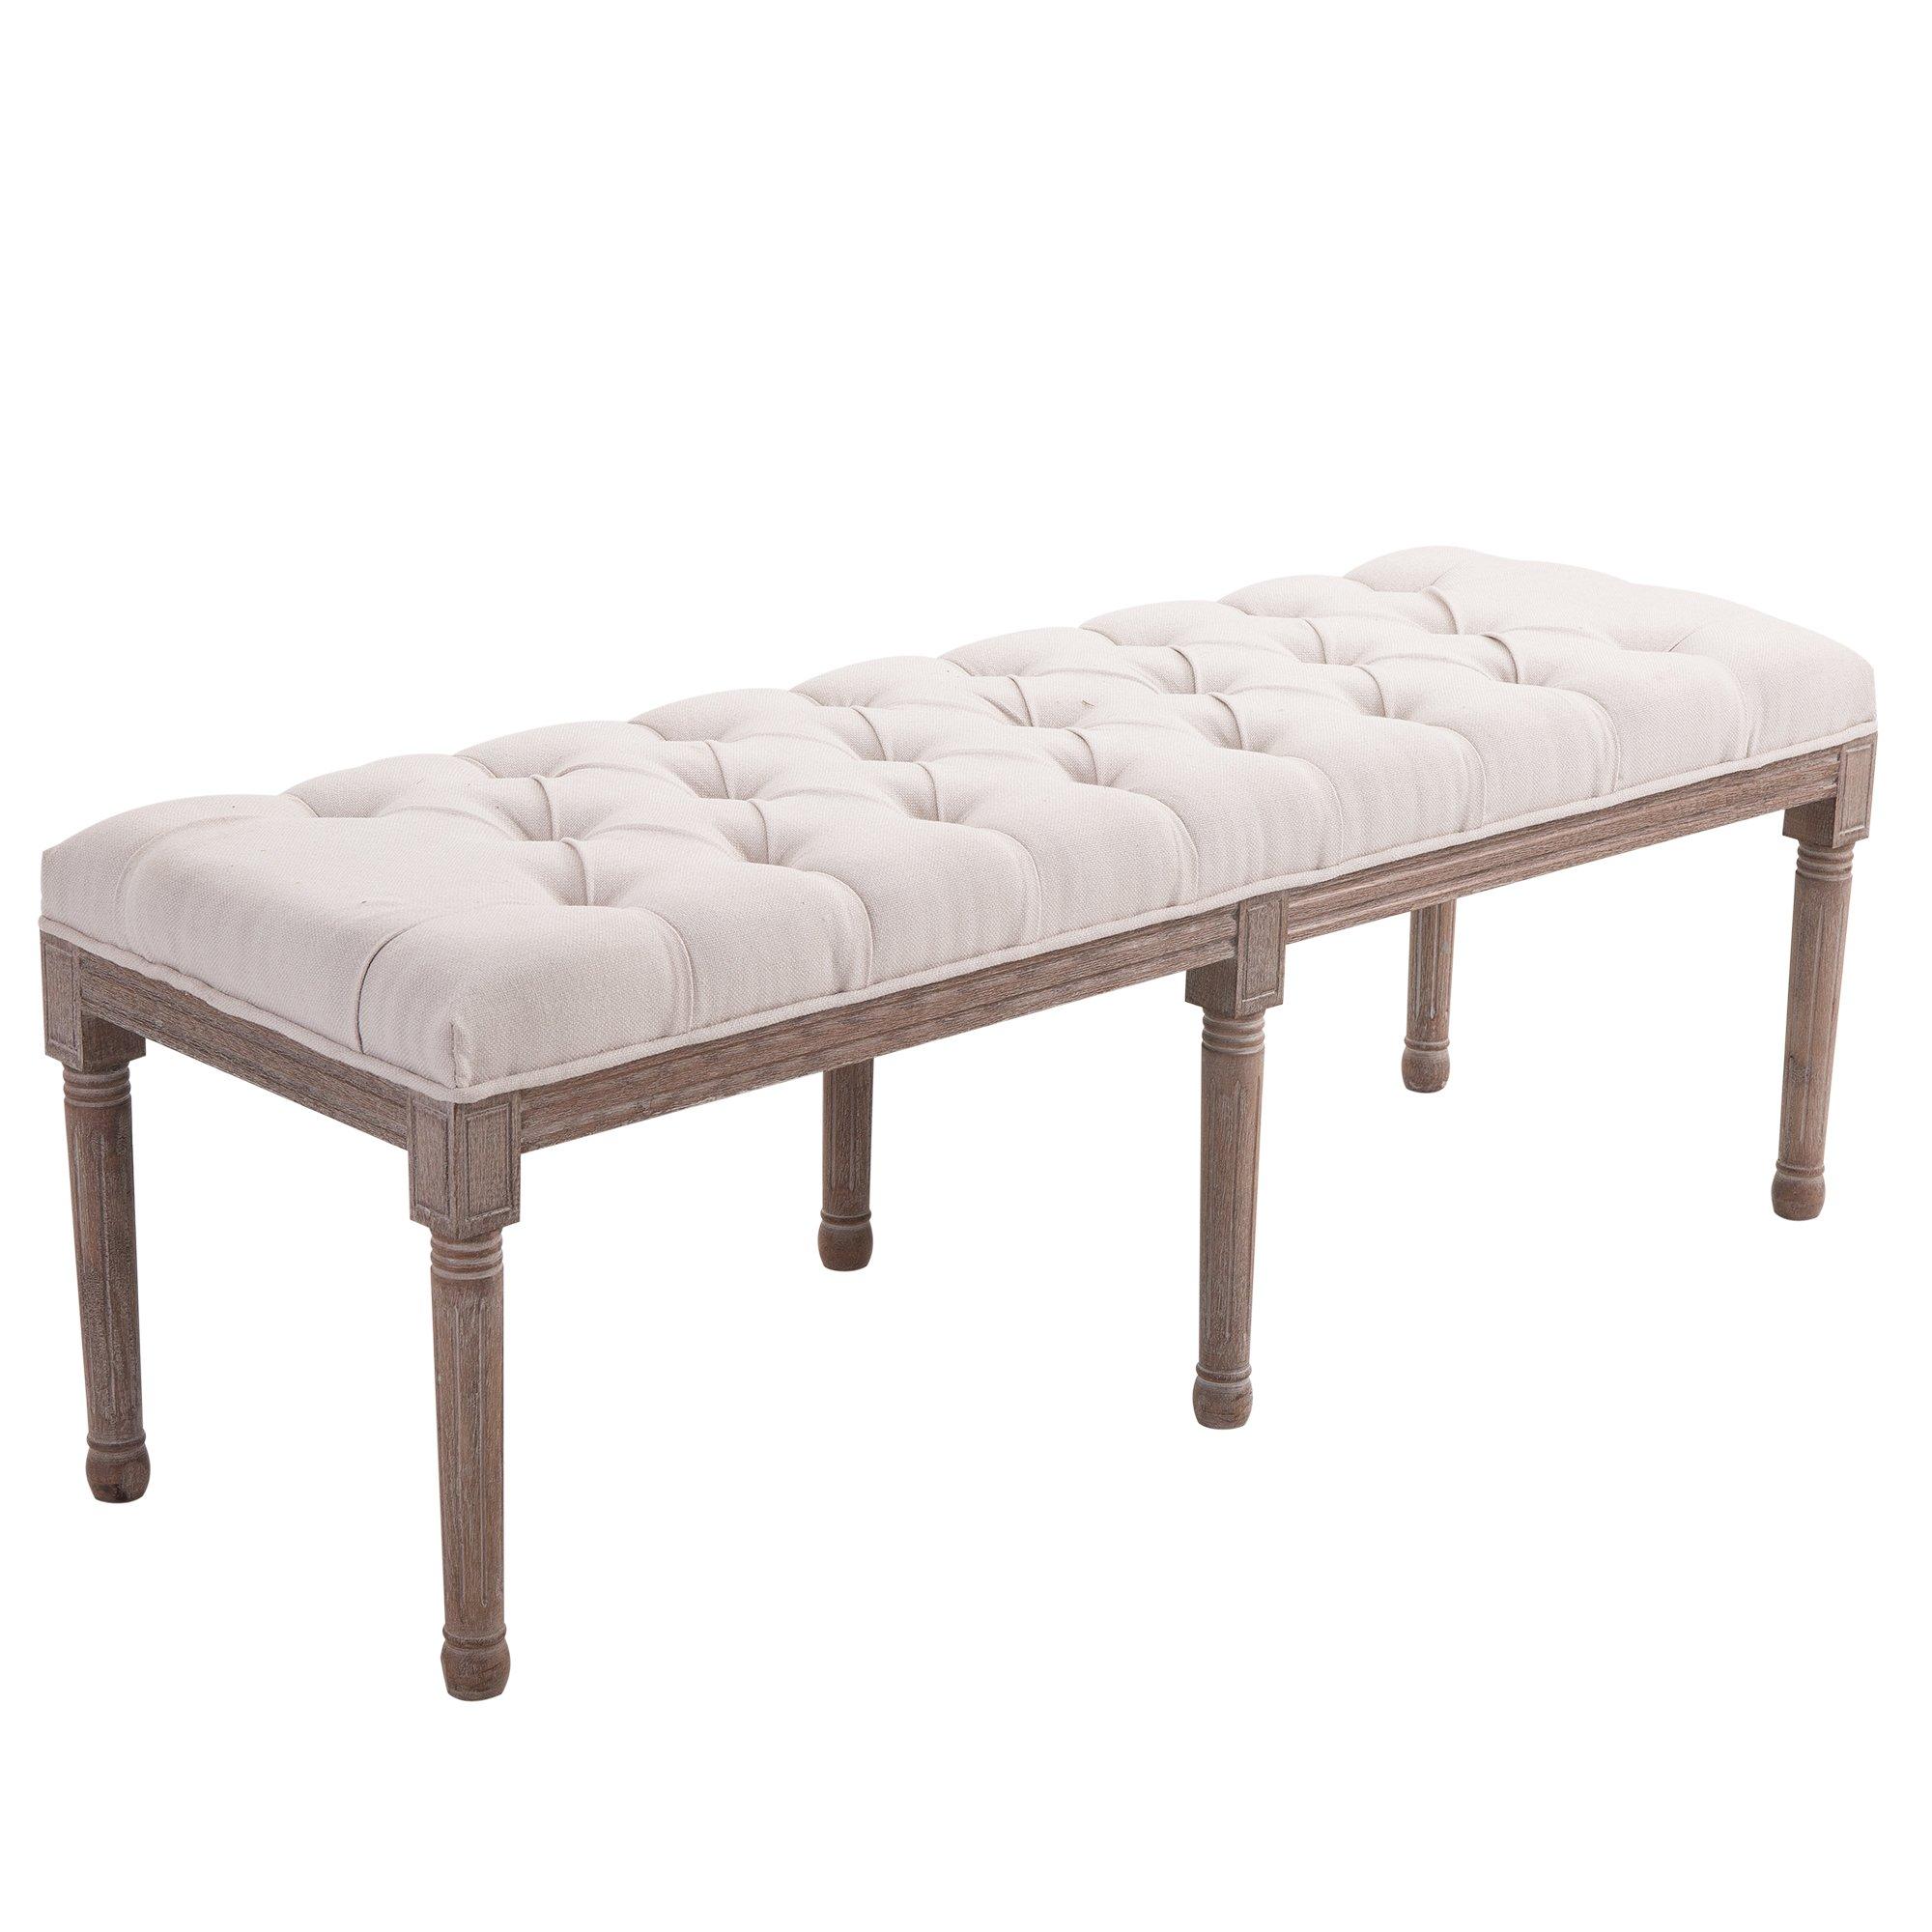 Stool Bench Chic Button Tufted 3 Person Bedside Seat End Hallway